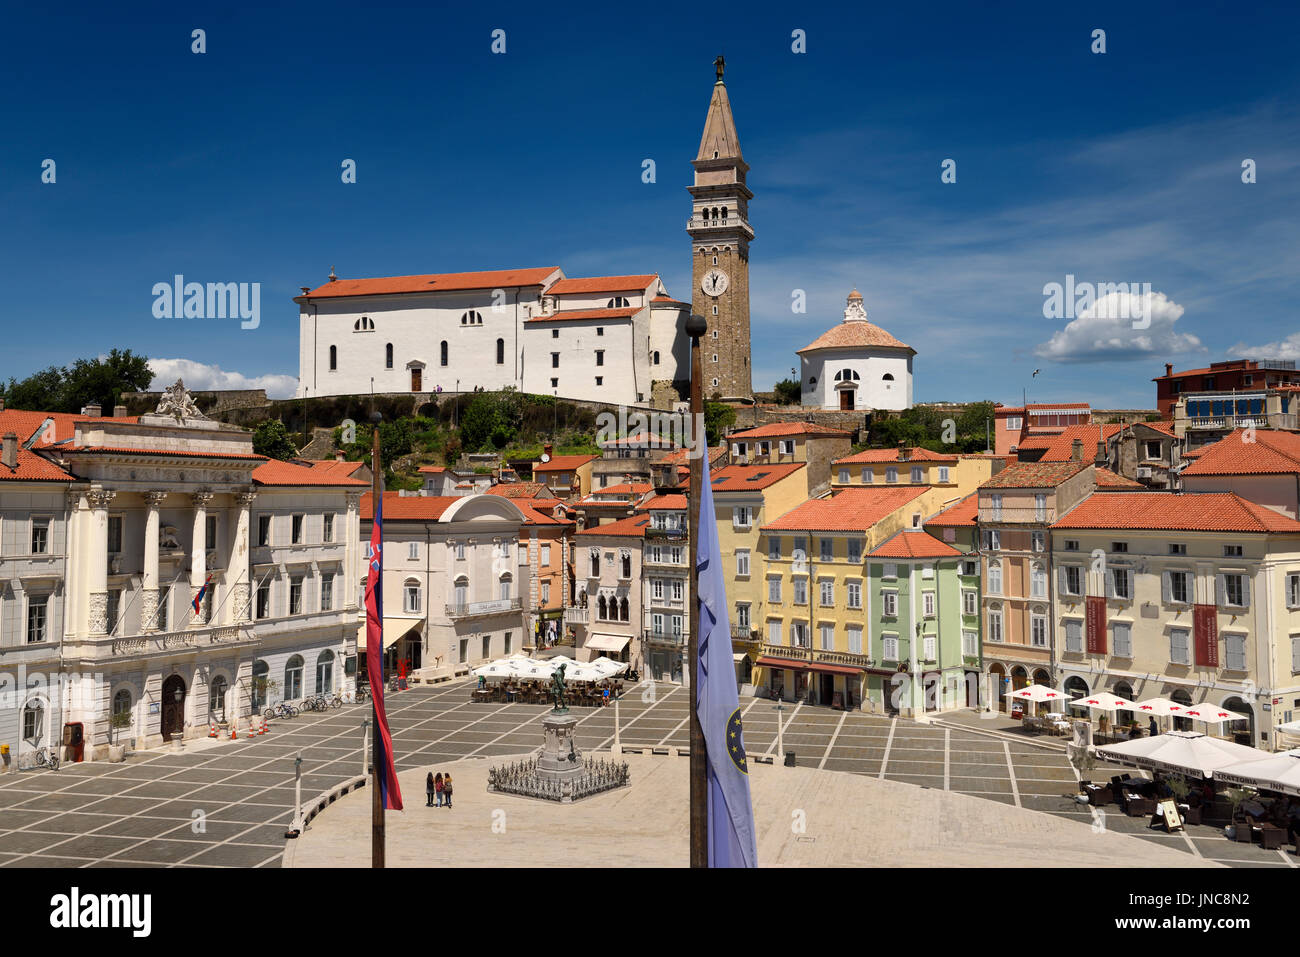 Elevated view of Tartini Square in Piran Slovenia with City Hall, St. George's Roman Catholic Cathedral with clock bell tower and baptistery Stock Photo